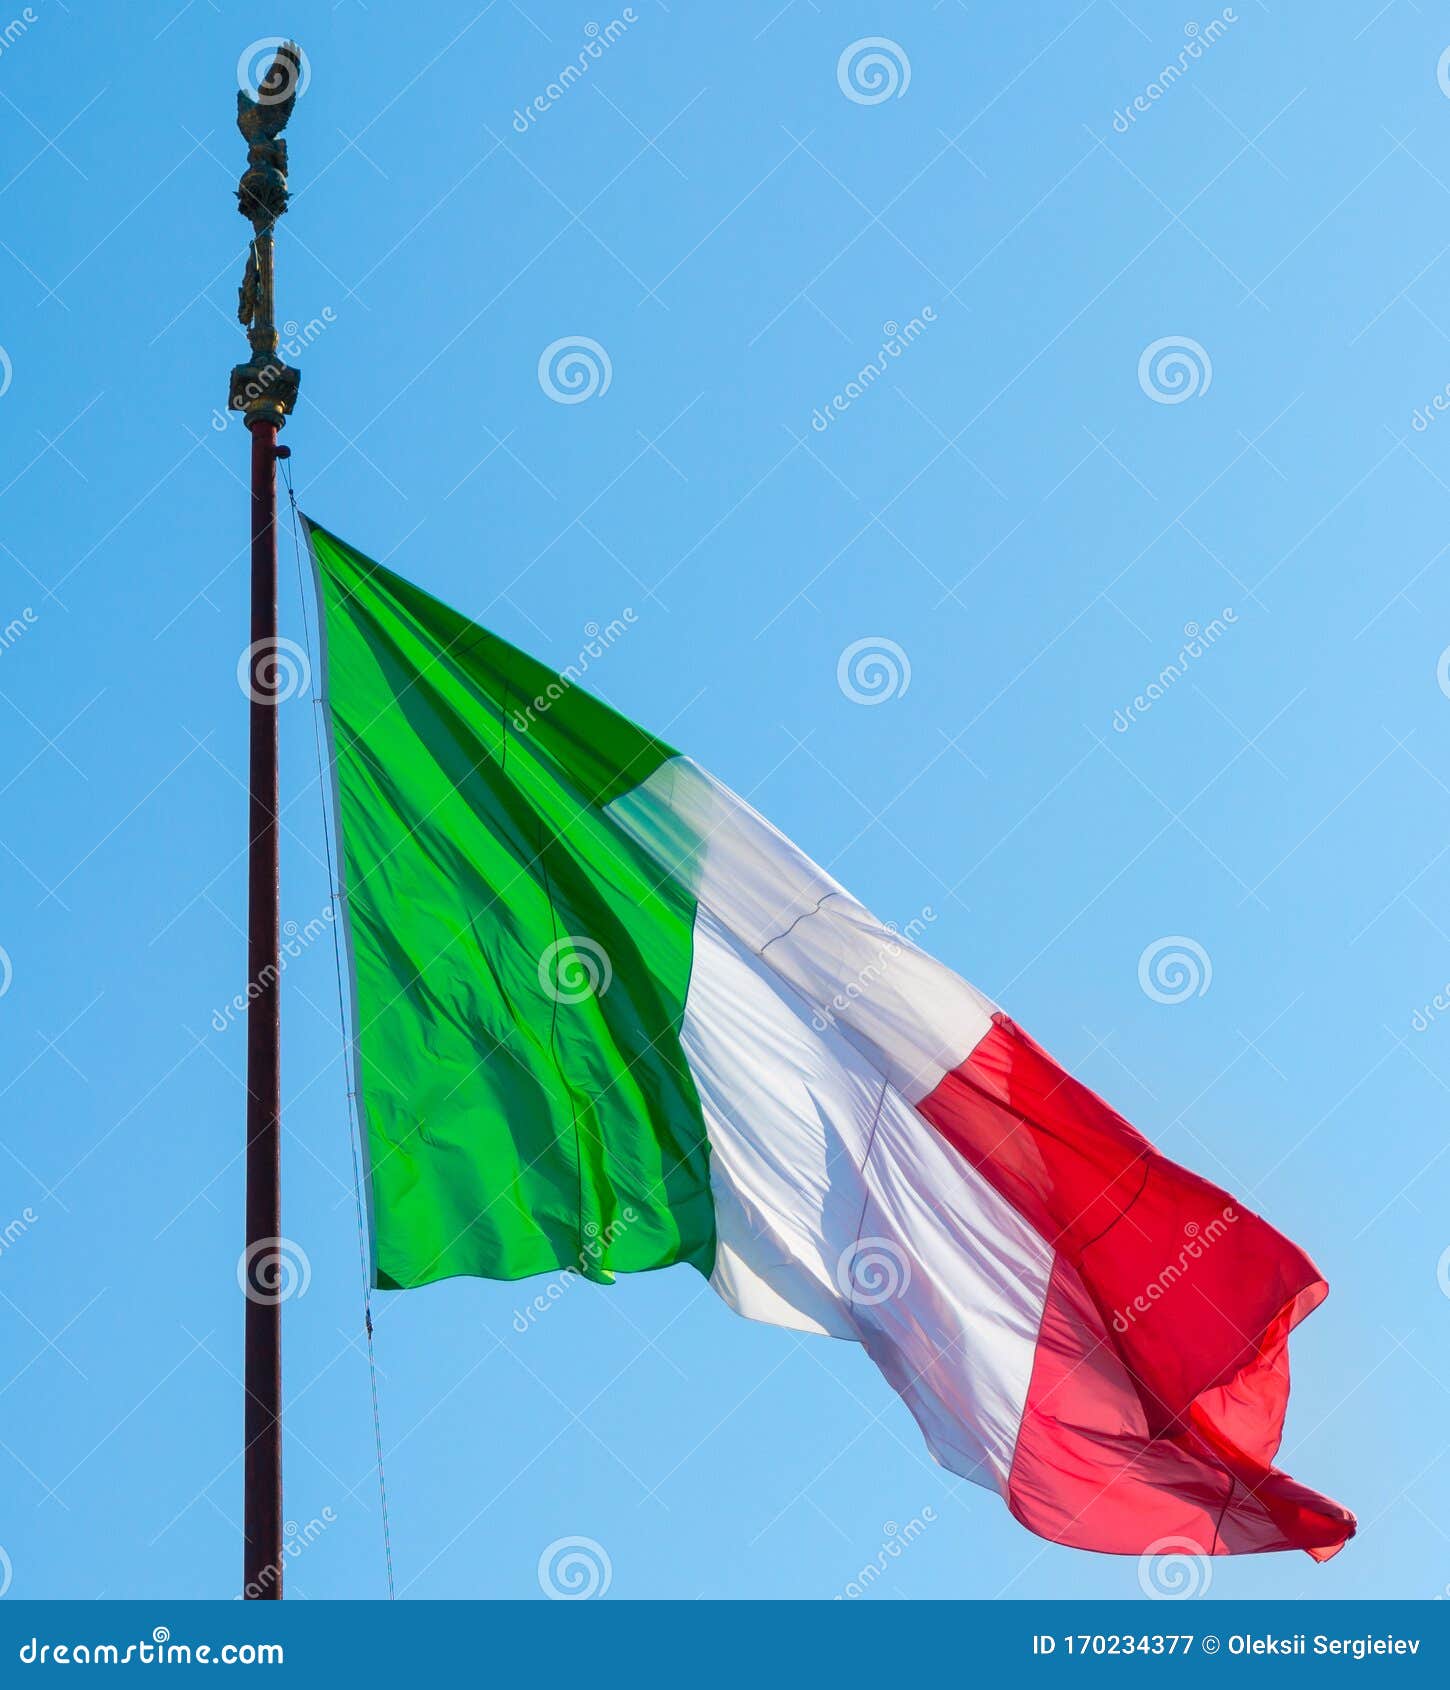 Real Italian Flag. Rome, Italy - Oct 03, 2018: Real state flag of the Republic of Italy